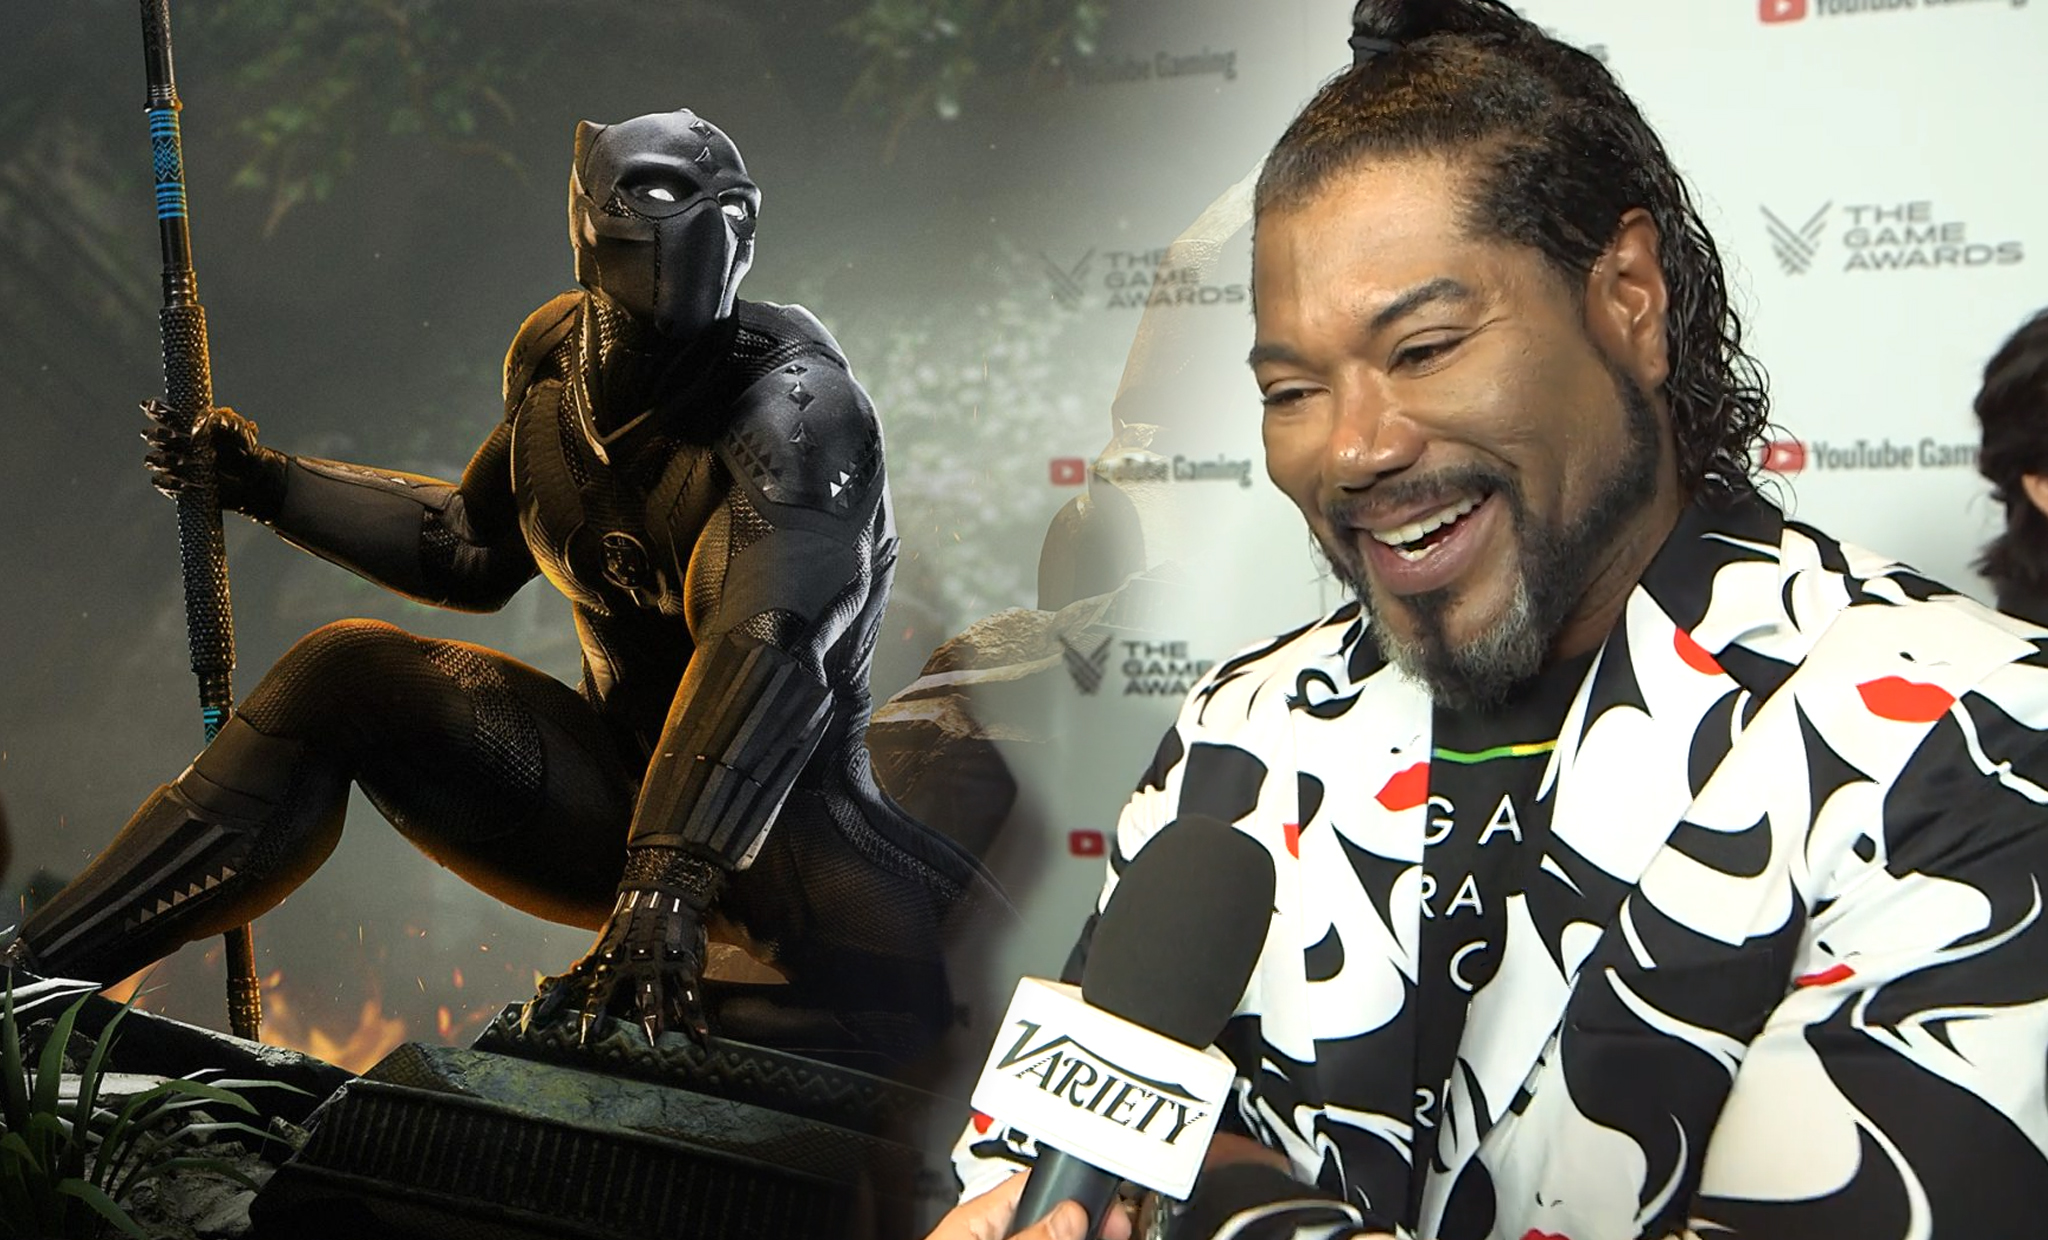 Marvel's Avengers': 'God of War's Christopher Judge Voicing Black Panther -  Murphy's Multiverse